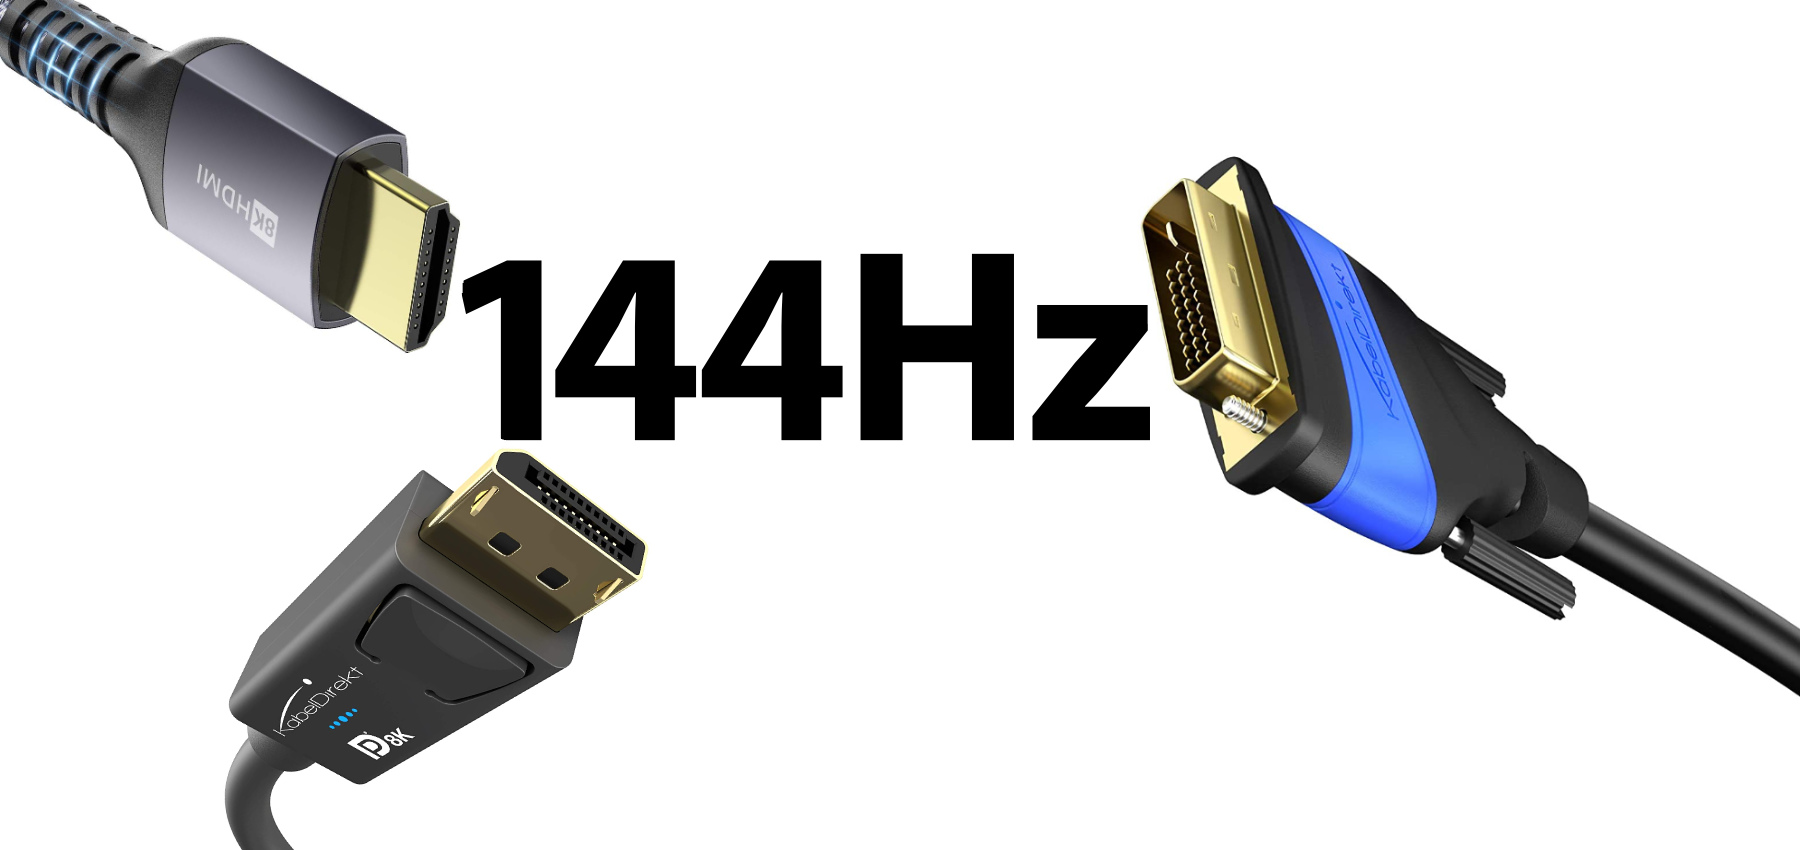 Møde sød mesterværk Can HDMI Do 144Hz - Yes, Under Some Conditions